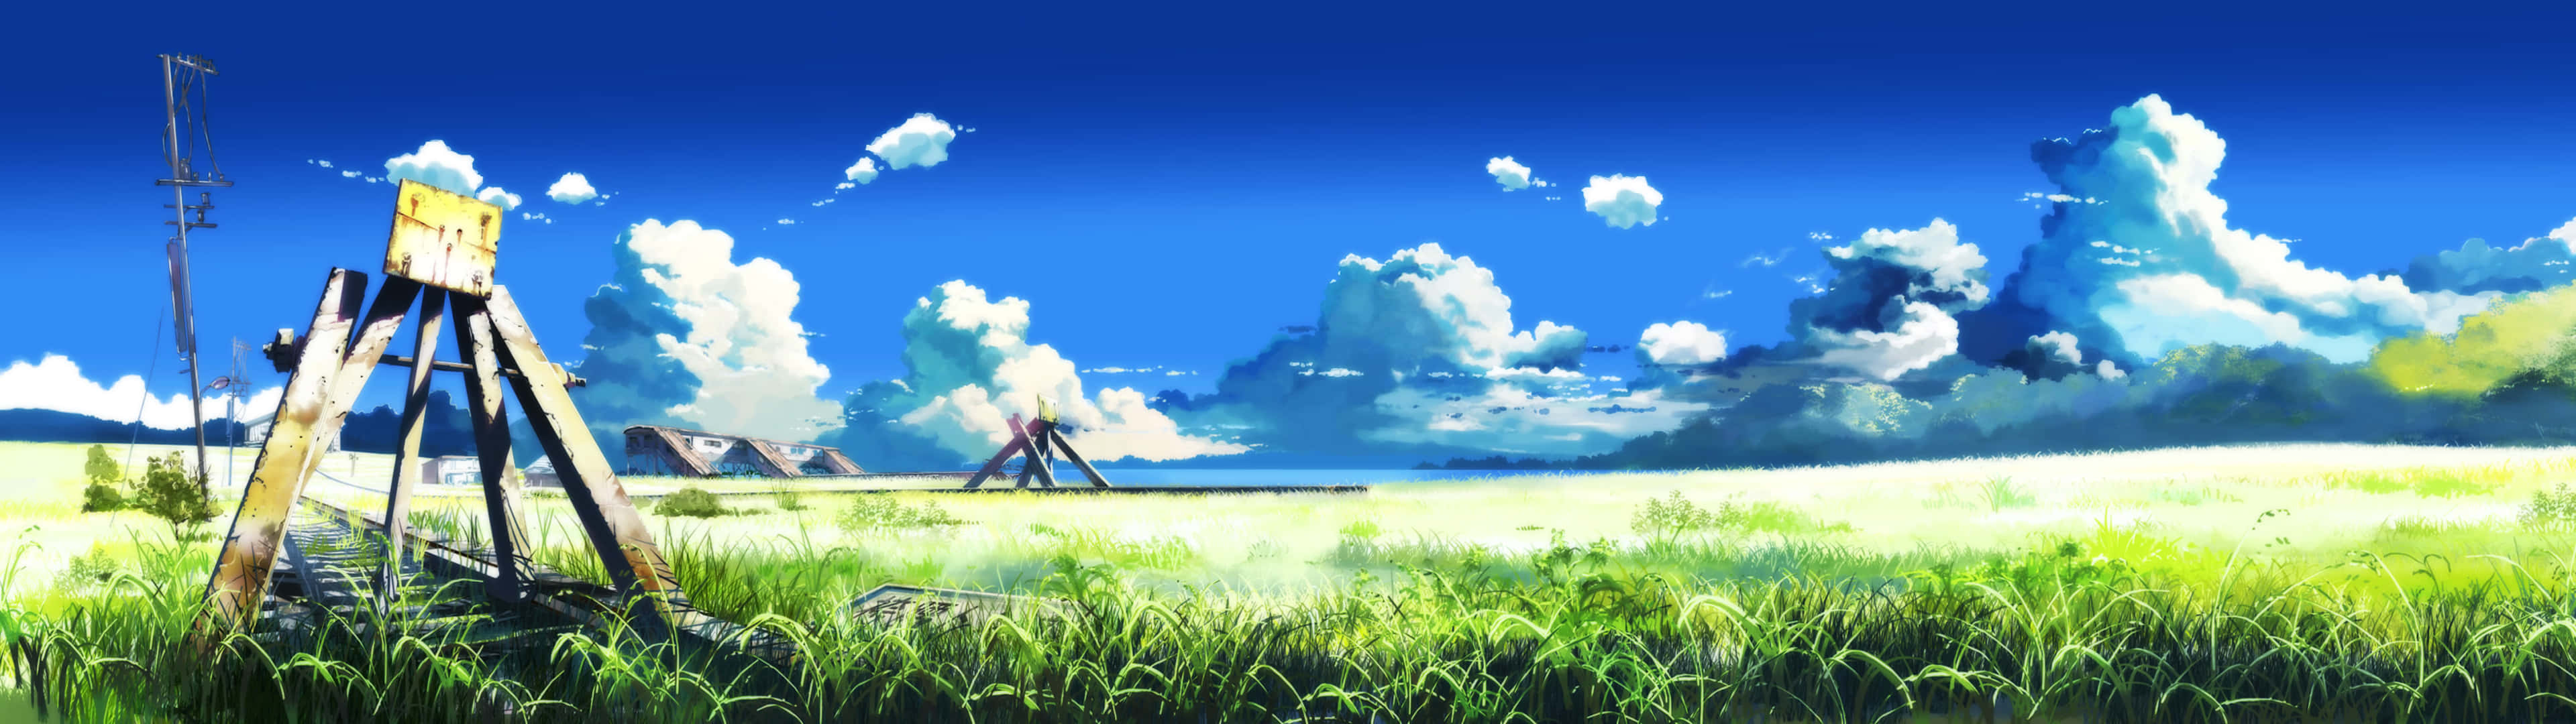 3840x1080 Anime Scenery Green Field Picture